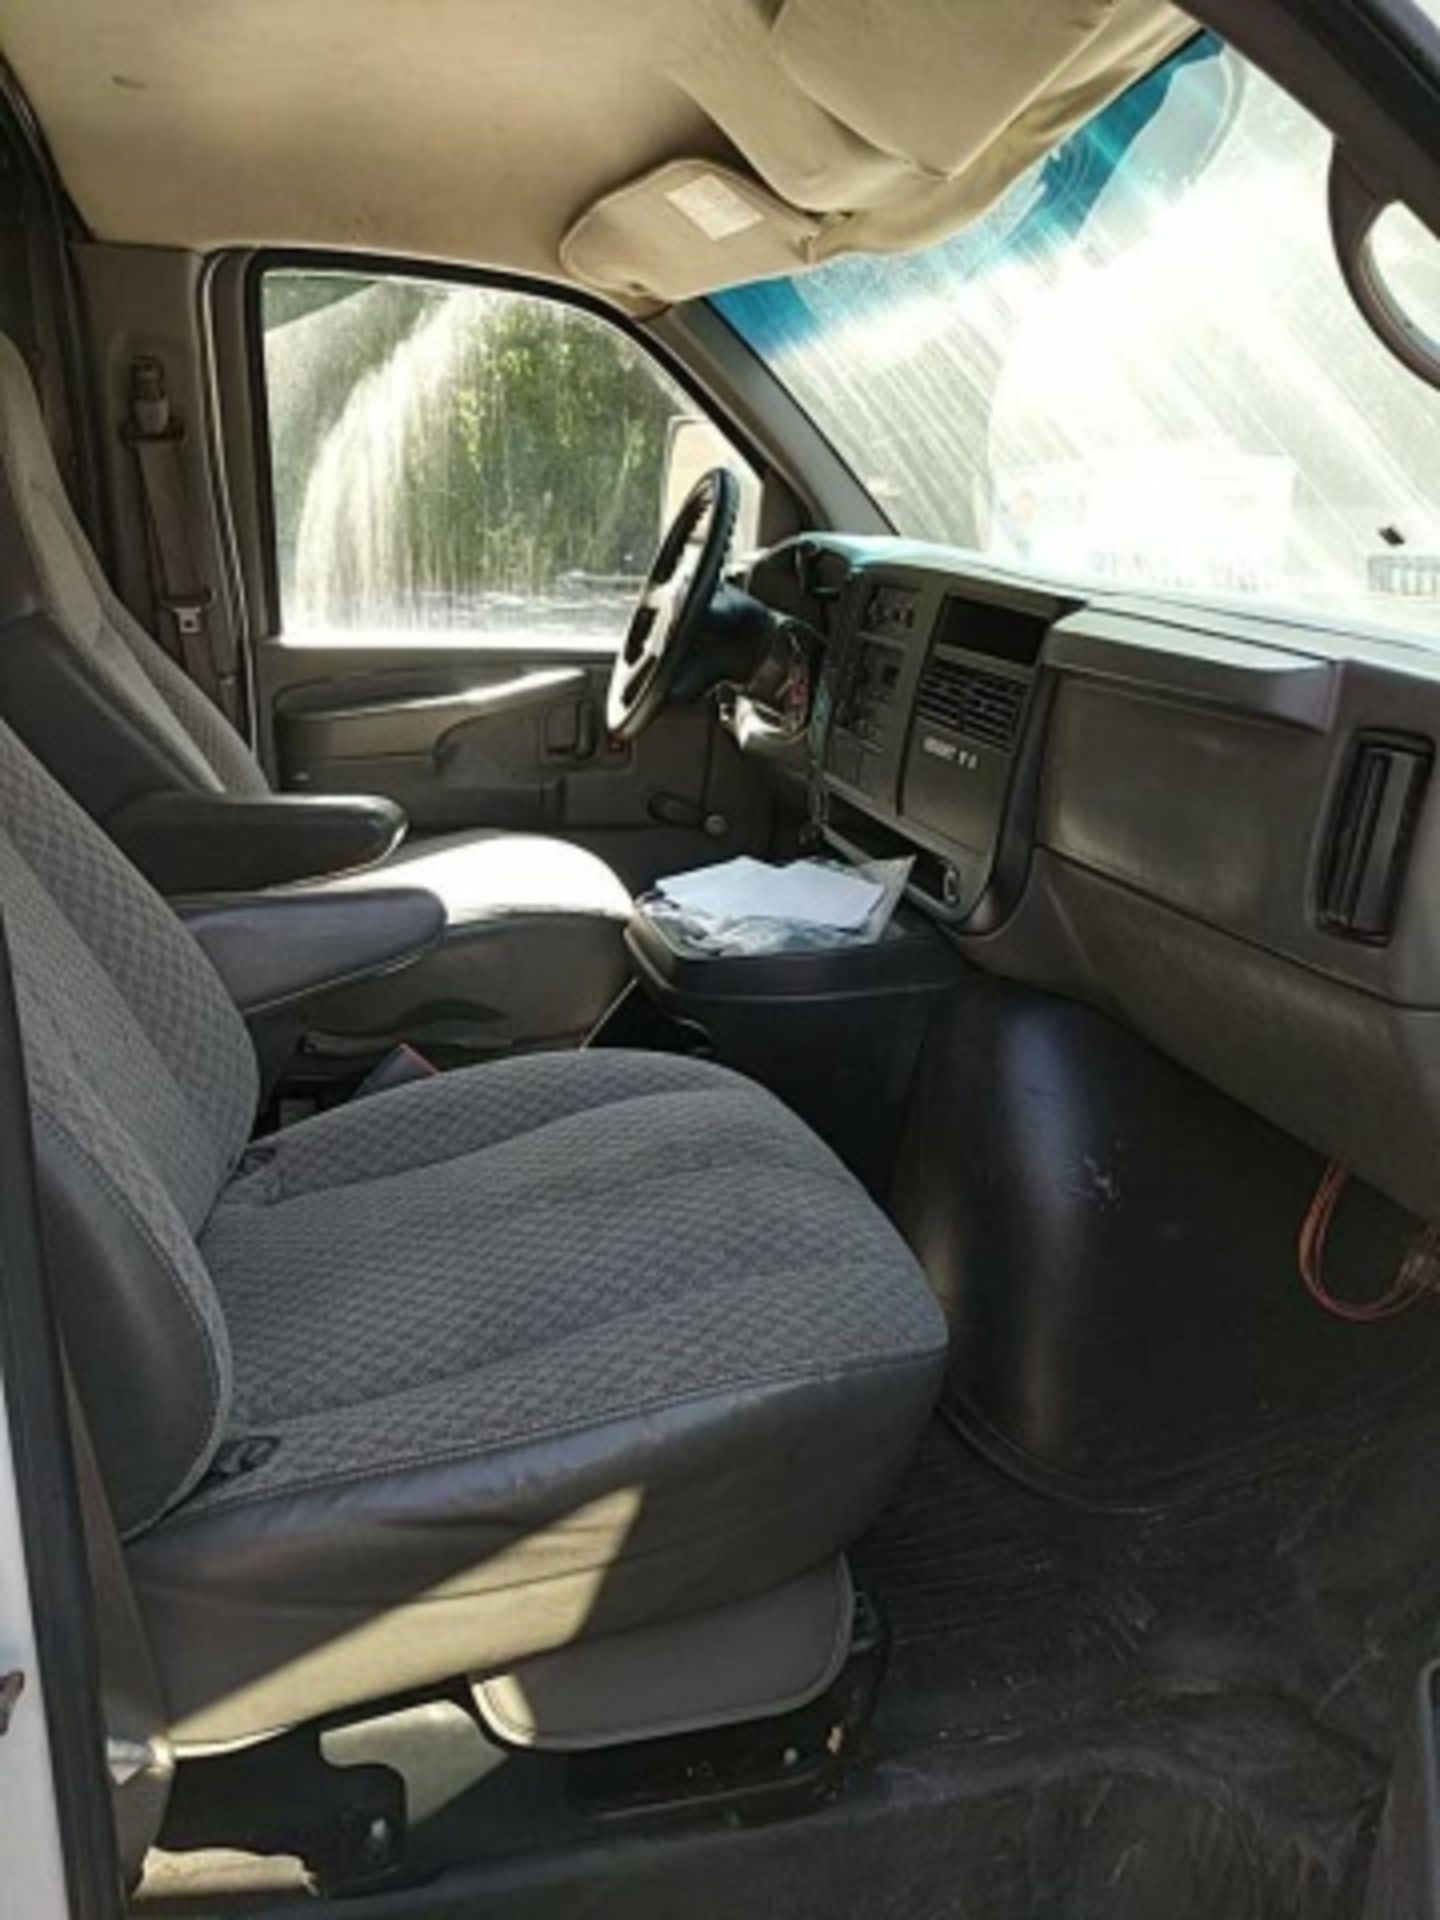 2006 Chevrolet Express 3500 - Image 8 of 15